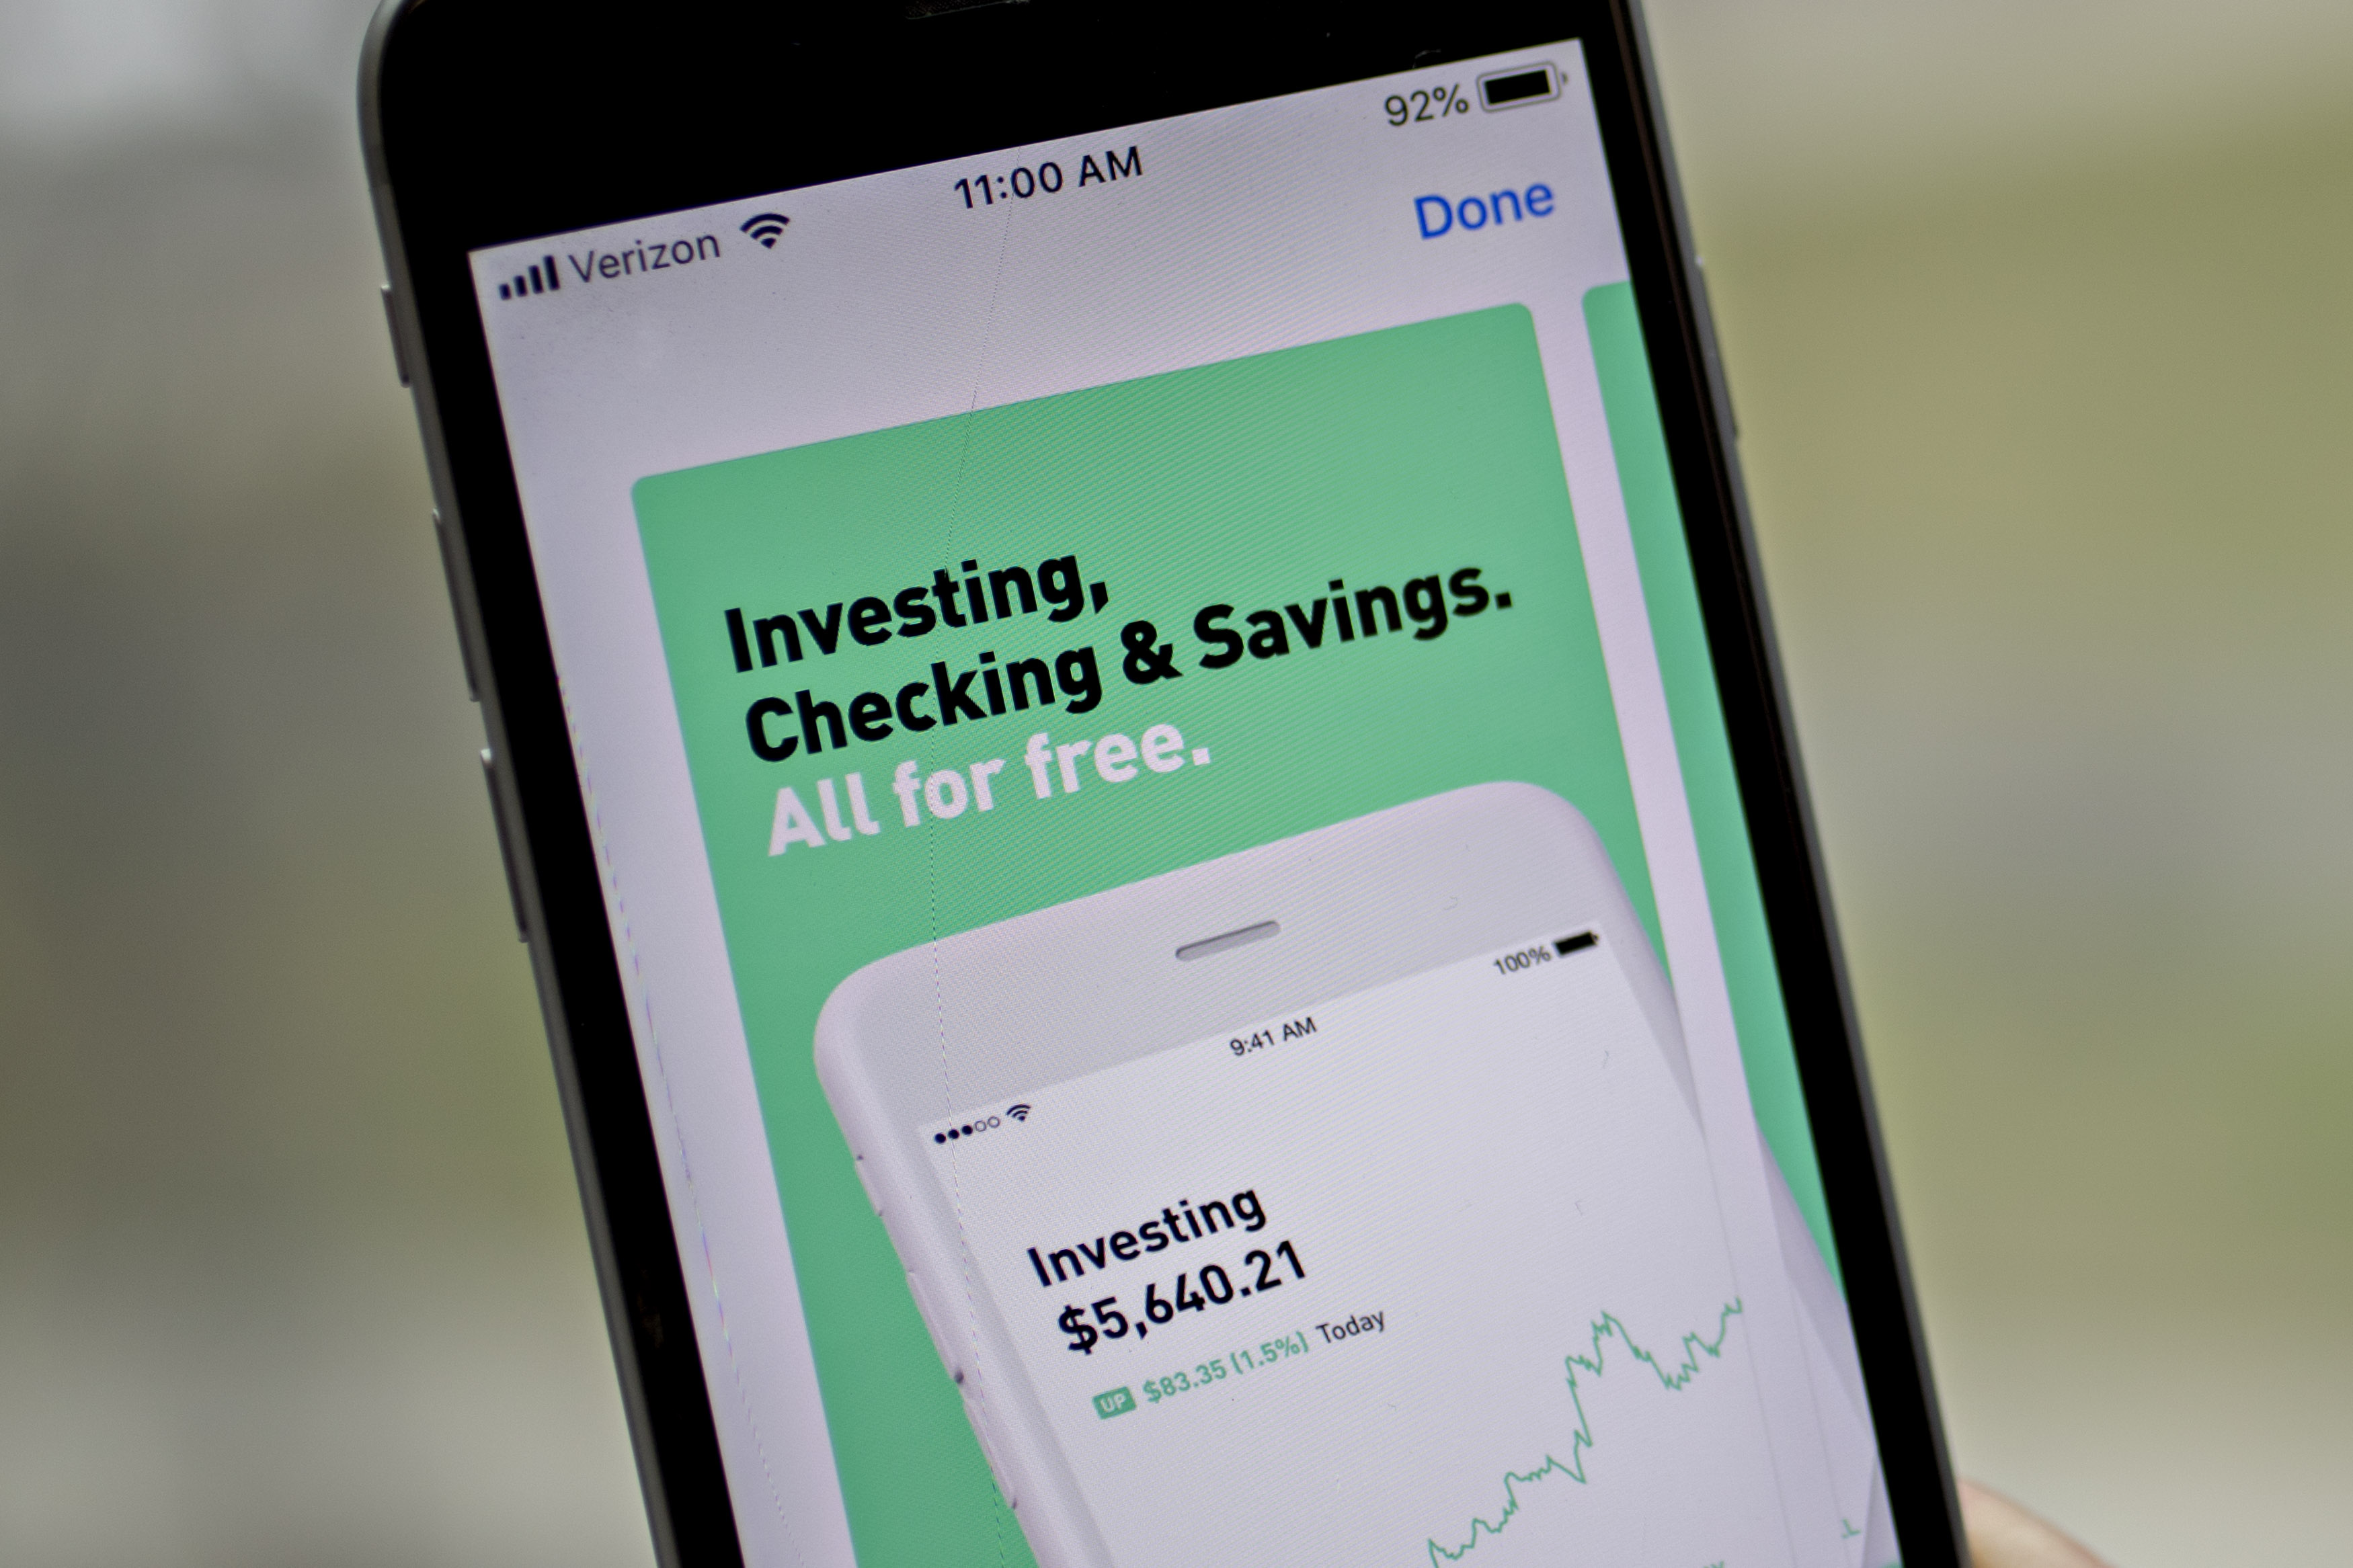 Robinhood App: Is Checking Account Safe? SPIC Has 'Concerns' | Money